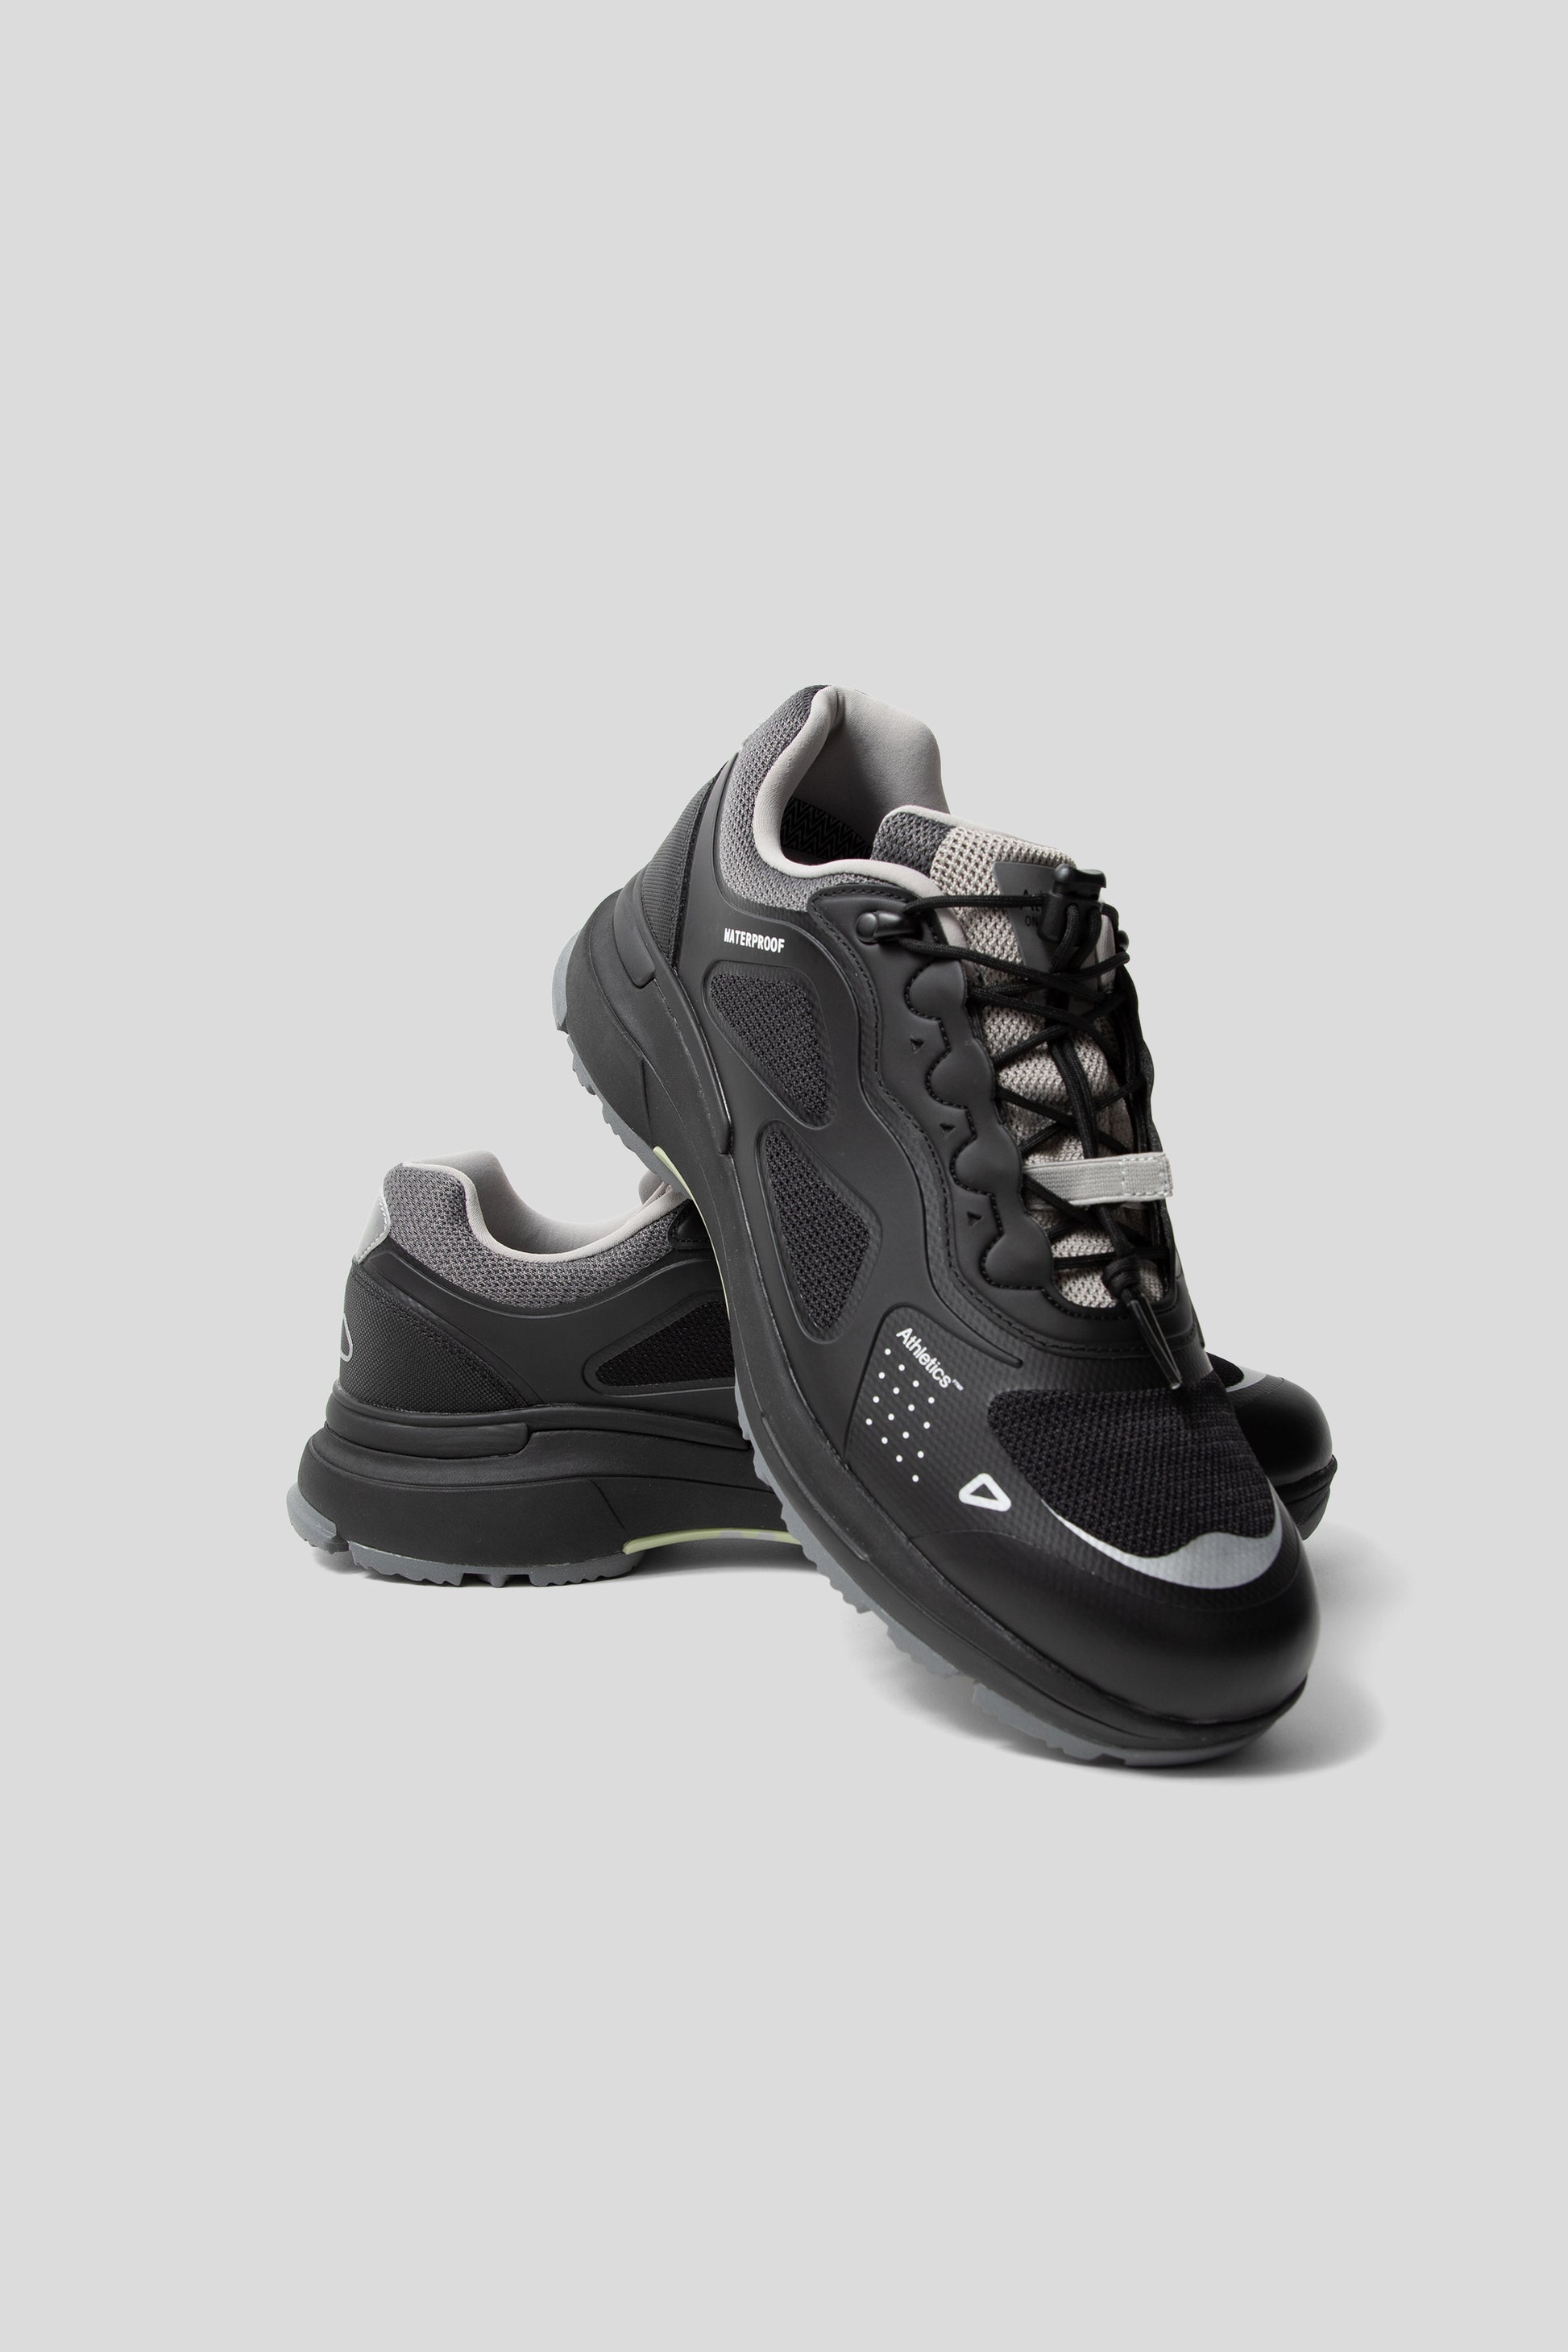 Athletic FTWR One 2 Waterstop Low's in Night Raven colourway